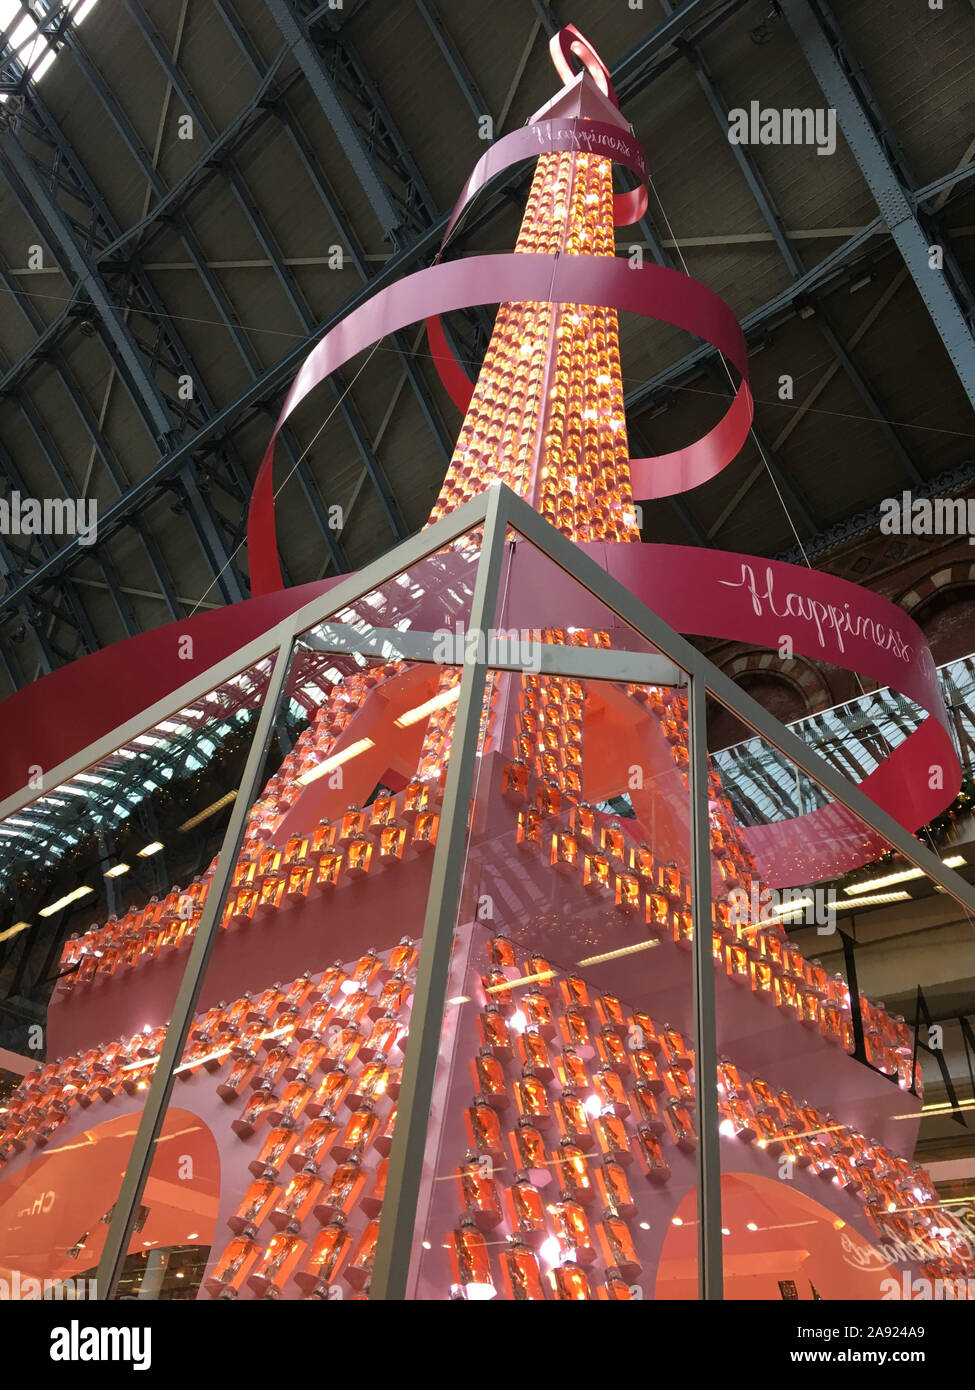 The 36-foot-tall sparkling installation of perfume bottles on an Eiffel Tower-shaped Christmas tree in St Pancras station, London, which contains more than 1,500 bottles of Lanc??me's signature fragrance, 'La Vie Est Belle'. Stock Photo